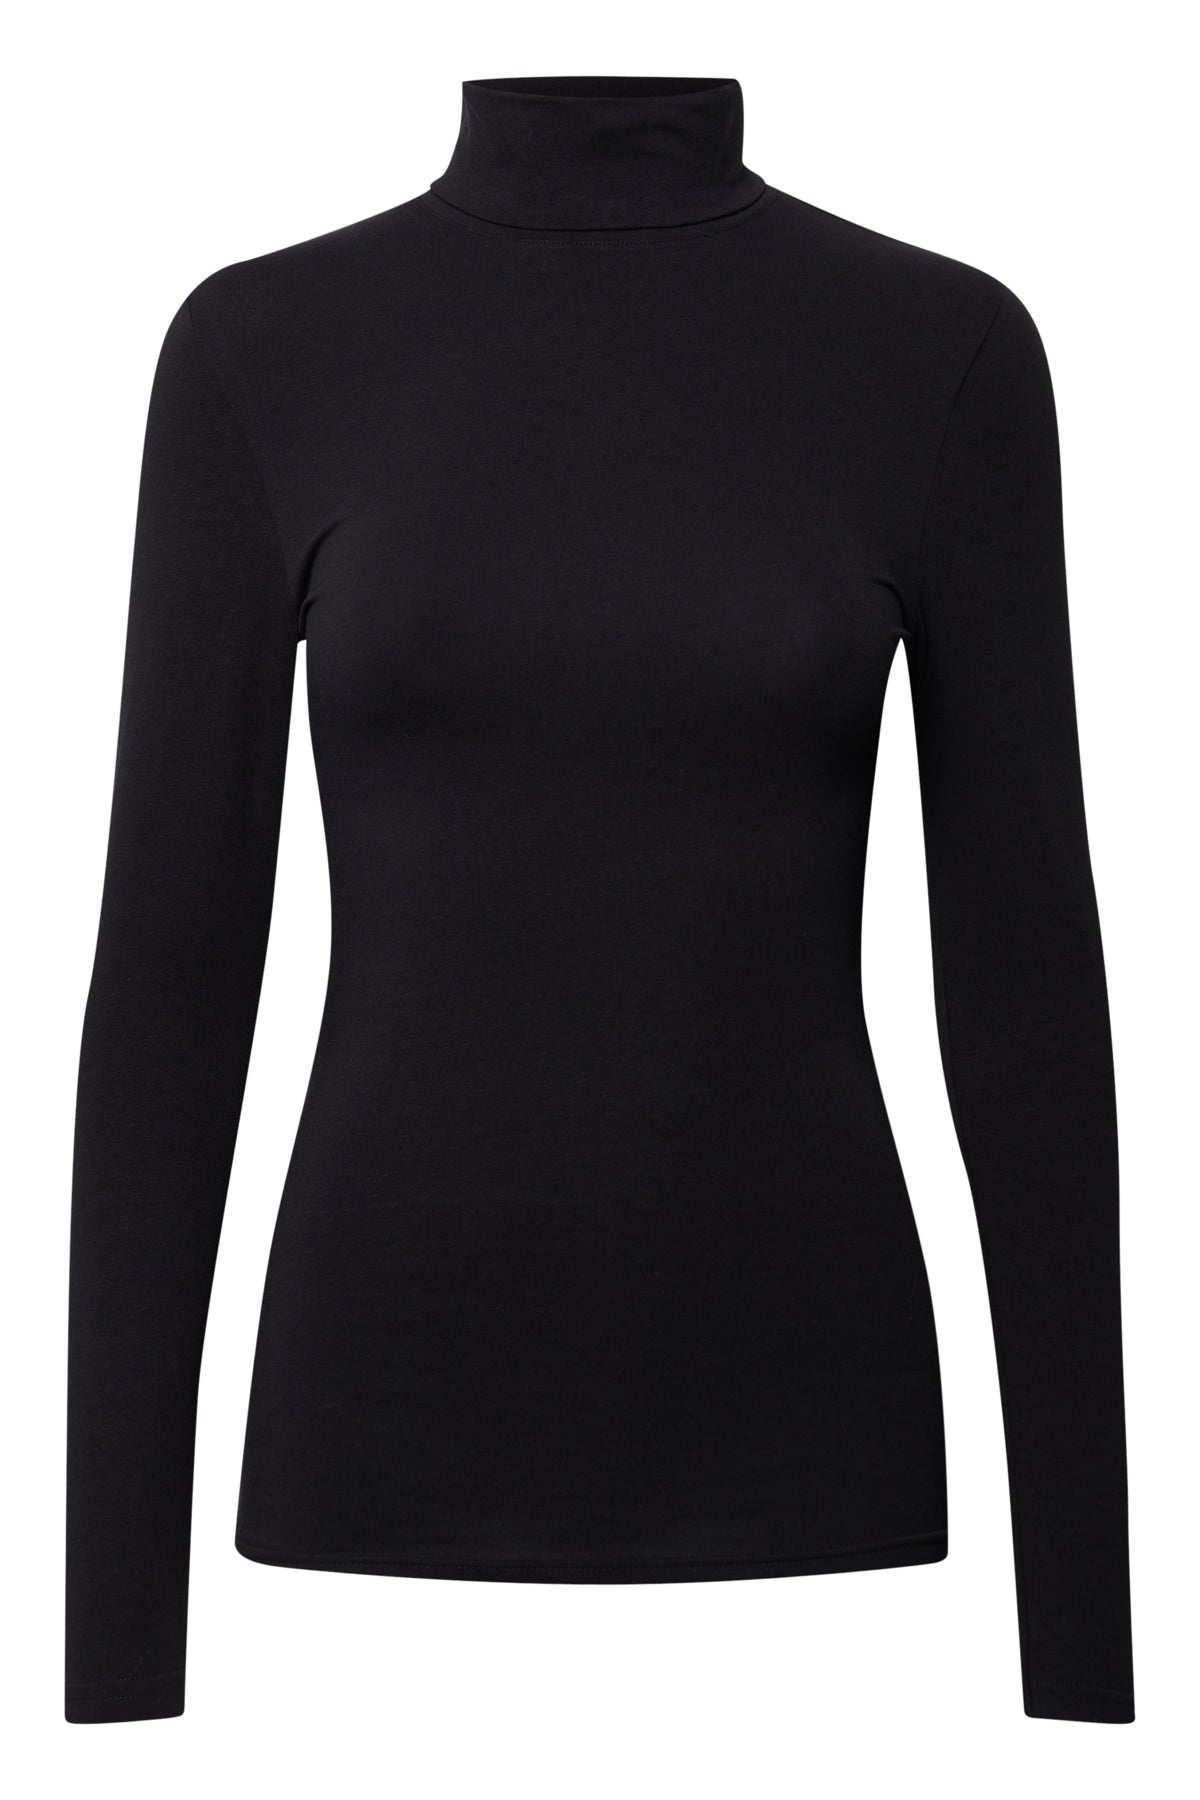 B.young Pamila Black Jersey Roll Neck